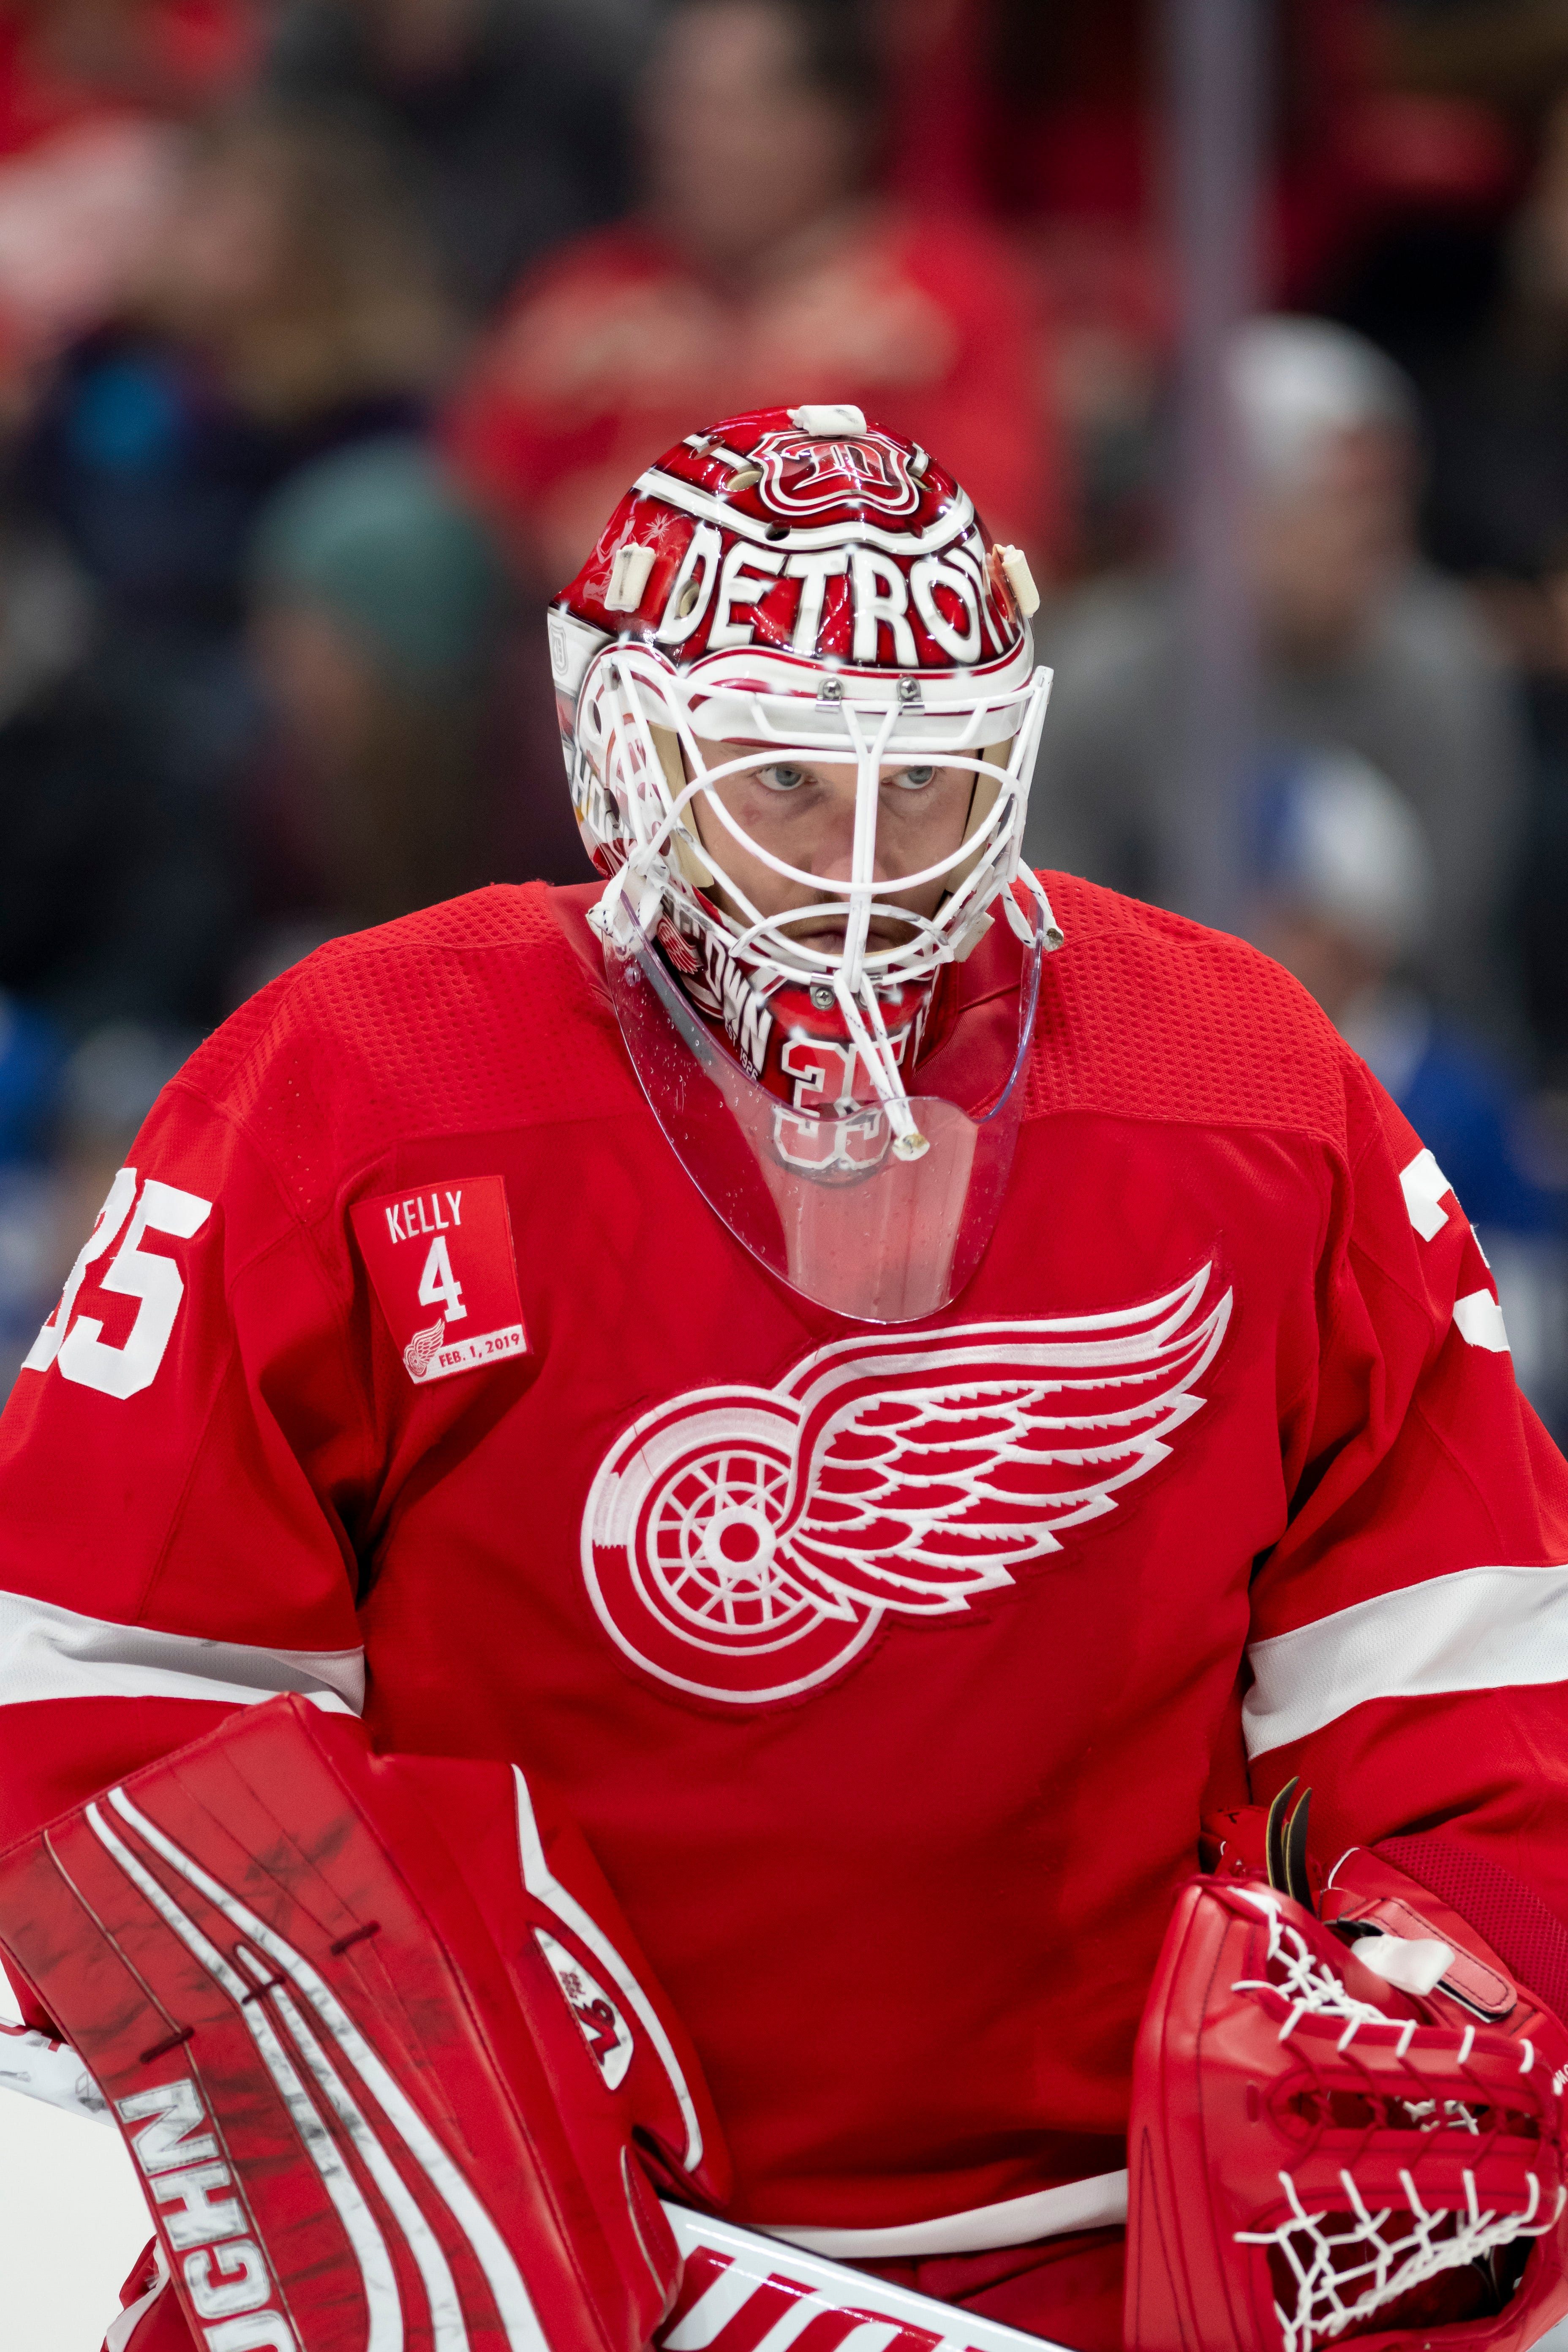 10. Jimmy Howard, goaltender. Several times during Howard’s career it appeared his time in Detroit was done, only to watch him reboot, retrench, and become a player the Wings couldn’t afford to lose. The Wings re-signed Howard, 35, late this season, knowing he was far away the best option they had in the organization. He’s an important veteran presence on this ever-younger team these days.